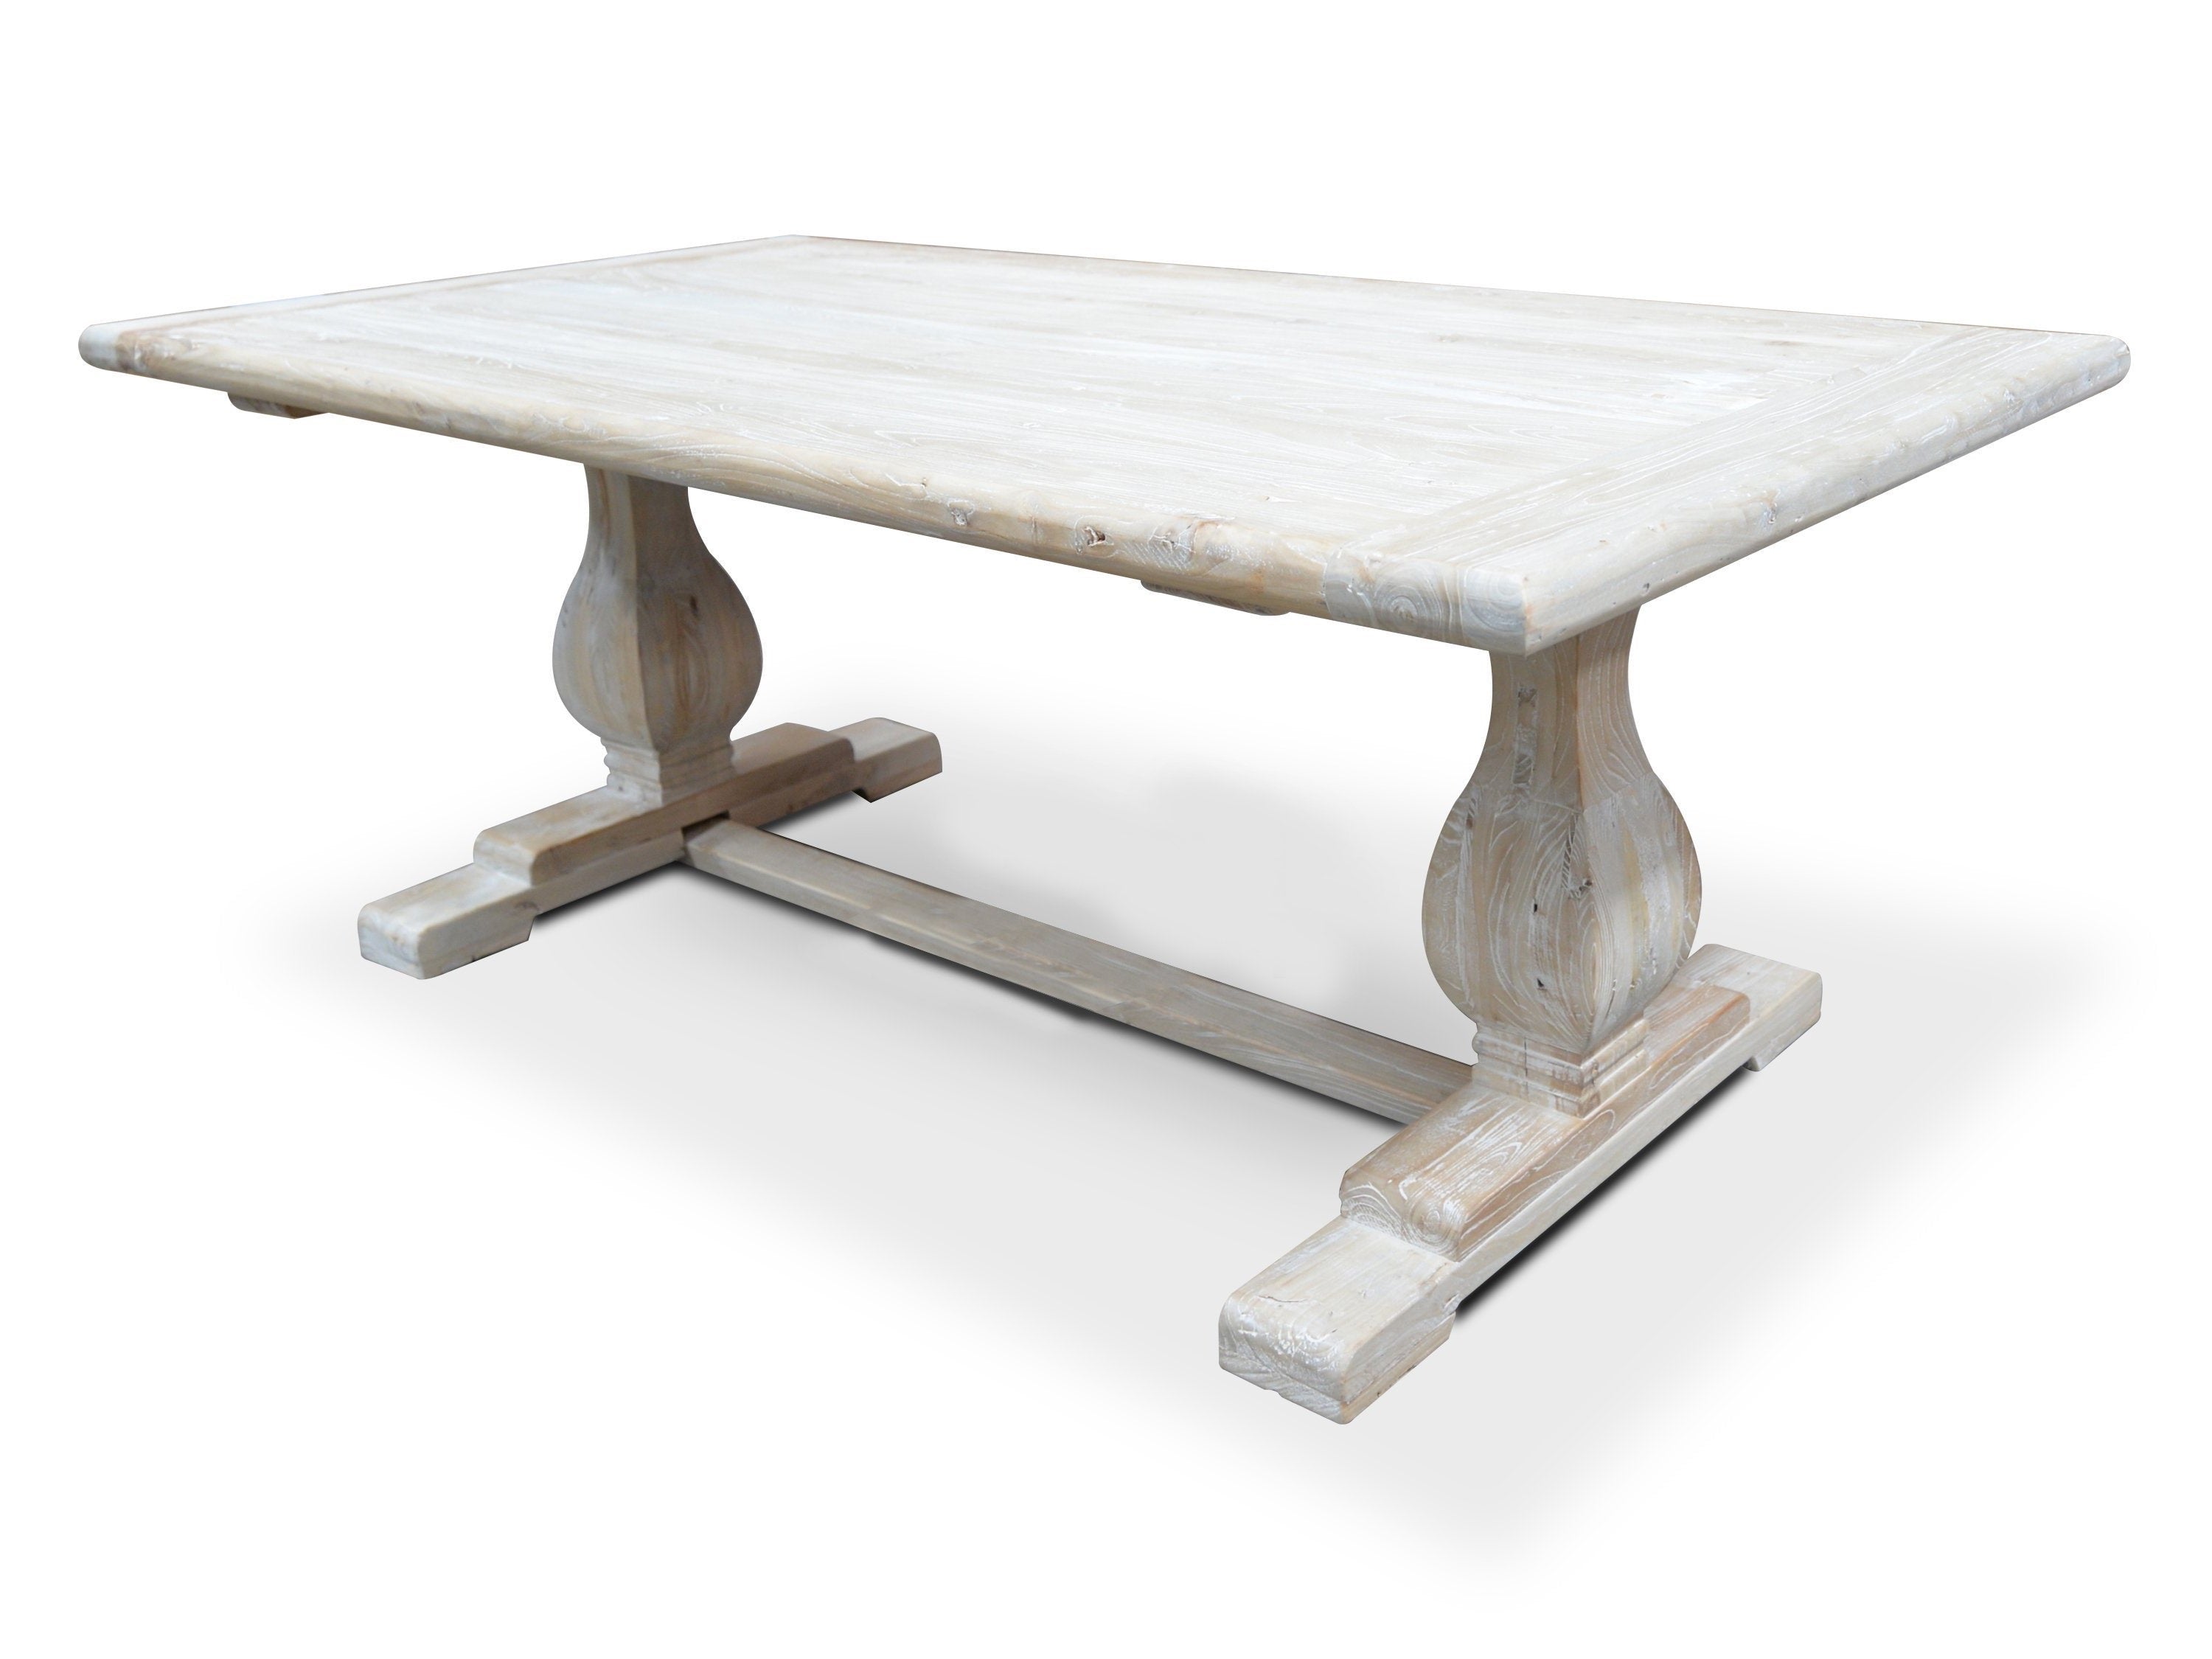 Titan Reclaimed 1.98m ELM Wood Dining Table - Rustic White Washed